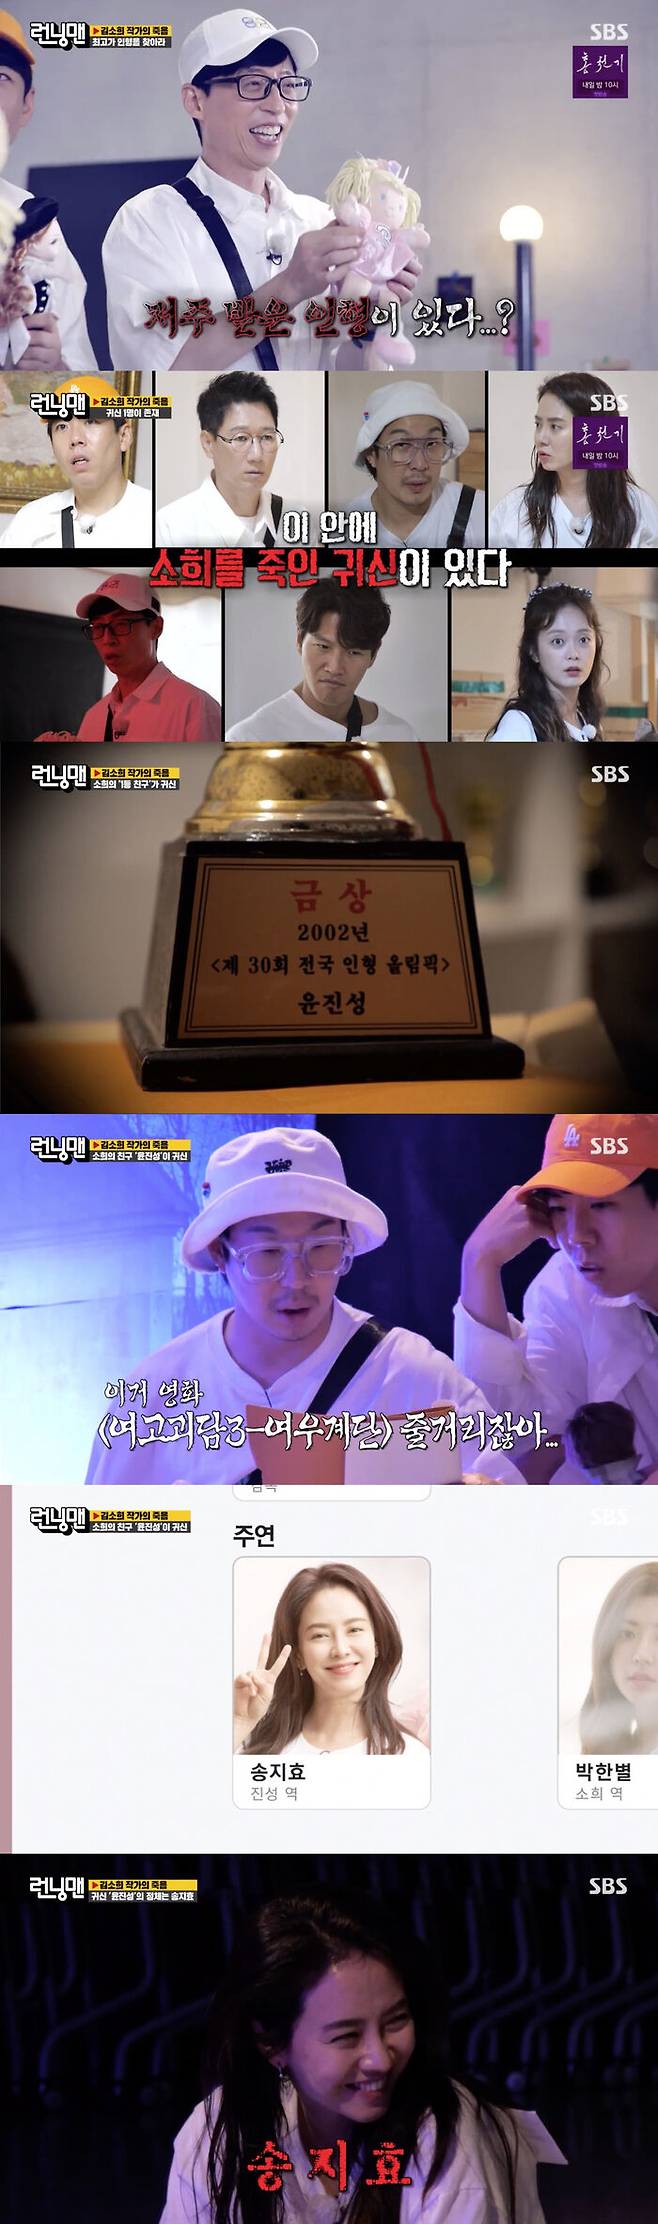 The Identity of the Ghost, who cursed the best Doll, was Song Ji-hyo.On SBS Running Man broadcasted on the 29th, Sick Doll Discrimination Race was held.On this day, the members went to find the best Doll left by Kim So Hee writer.And they found out that the best Doll is the cursed Doll, and that the ghosts who cursed Doll and killed Kim So Hee are mixed in the members.In order for humans to live, if they find Doll, who is cursed among the seven Dolls that the members choose, and cut the ship, the ghost will die and Earth 2 can do it.However, if you cut Dolls ship with a human name tag, you had to be careful because the owner of the Doll would die.The members diligently sought clues to find ghosts and cursed Dolls.In this process, Kim Jong Kook, Ji Suk-jin, and Yoo Jae-Suk were in-N-Out Burger in turn, and Haha, Yang Se-chan, Song Ji-hyo and Jeon So-min were in Earth 2.Earth 2 shared hints and reasoned for the Identity of Ghosts.As a result, he found out that Kim So Hee was the god of the handmade Doll, Jin Sung, and his current name does not have a personal video channel.The ghost candidates were completely narrowed down to Song Ji-hyo and Jeon So-min.Members heading to the decision with the last decision left, and Haha was excited to find important hints there.Haha then asked Song Ji-hyo if he was a ghost, so Song Ji-hyo denied it extremely and asked why he suspected himself.Haha then released the film Synopsys he found.The poster-topped film Synopsys was from the film Whispering Corridors - Fox Staircase, which depicts the story of Umchina Dance and So-hee and So-hees best friend Jin Sung.Earth 2 people who noticed this quickly searched for Fox Stairs and were surprised to find that the actor who played Jin Sung in the fox staircase was Song Ji-hyo.The Identity of the ghost Yun Jung they were looking for was Song Ji-hyo.Song Ji-hyo hid the target Doll on the 29th staircase that made the small One, preventing members from finding their Identity throughout the race, and in turn, in-N-Out Burger.Earth 2 One Human 3 guessed and put Doll on the judging board, six of the remaining two Dolls, and Song Ji-hyos Name tag came out when he cut Dolls stomach.So the ghost Song Ji-hyo, who was defeated by the final victory of the humans, caught the eye by performing the penalty of making the handmade Doll.